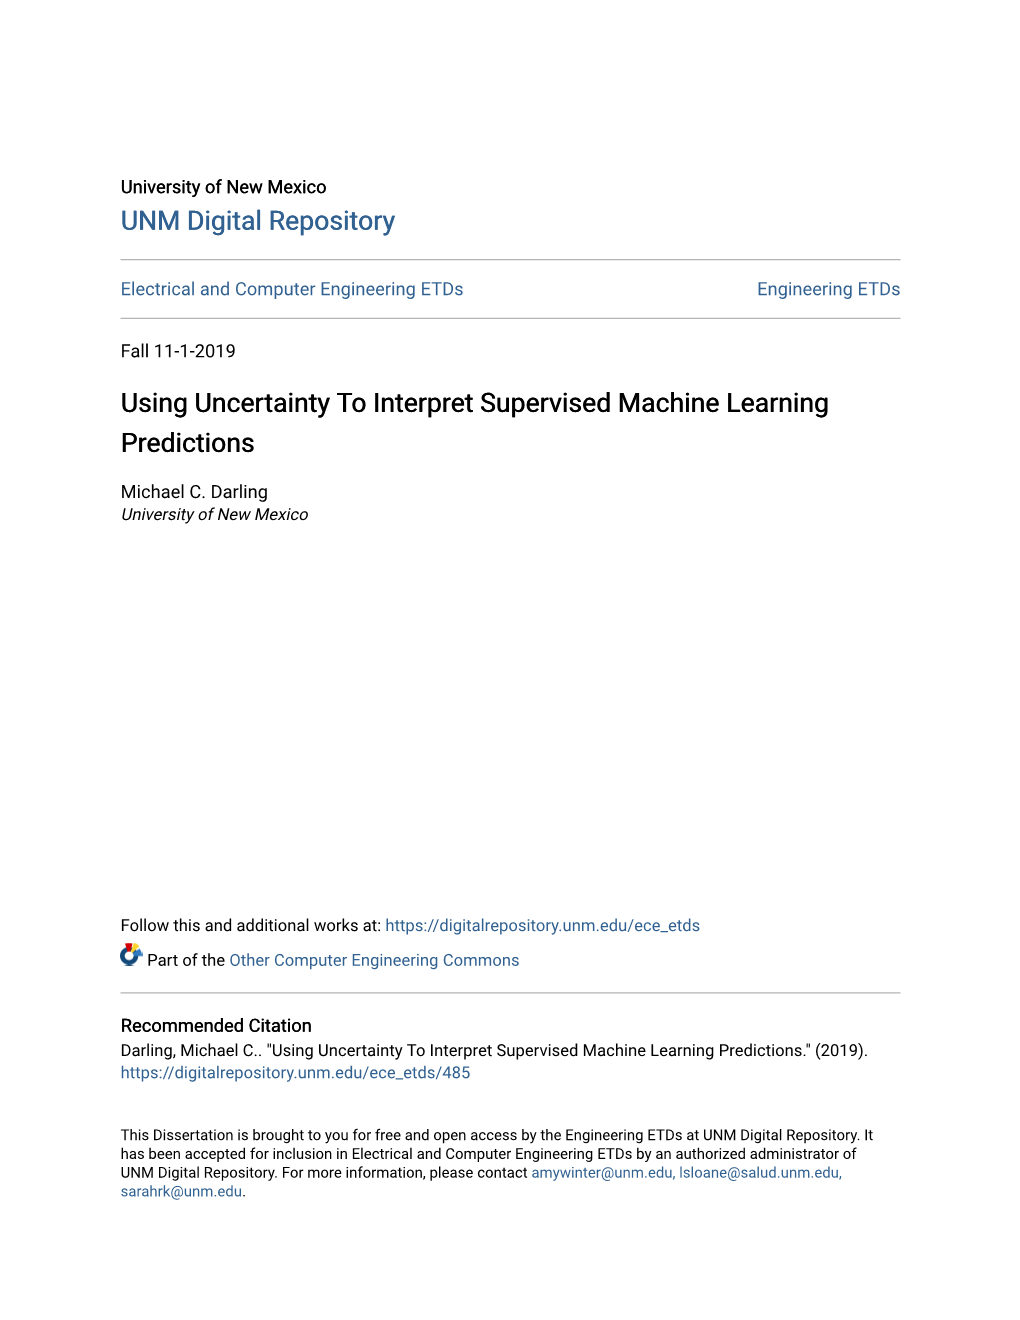 Using Uncertainty to Interpret Supervised Machine Learning Predictions